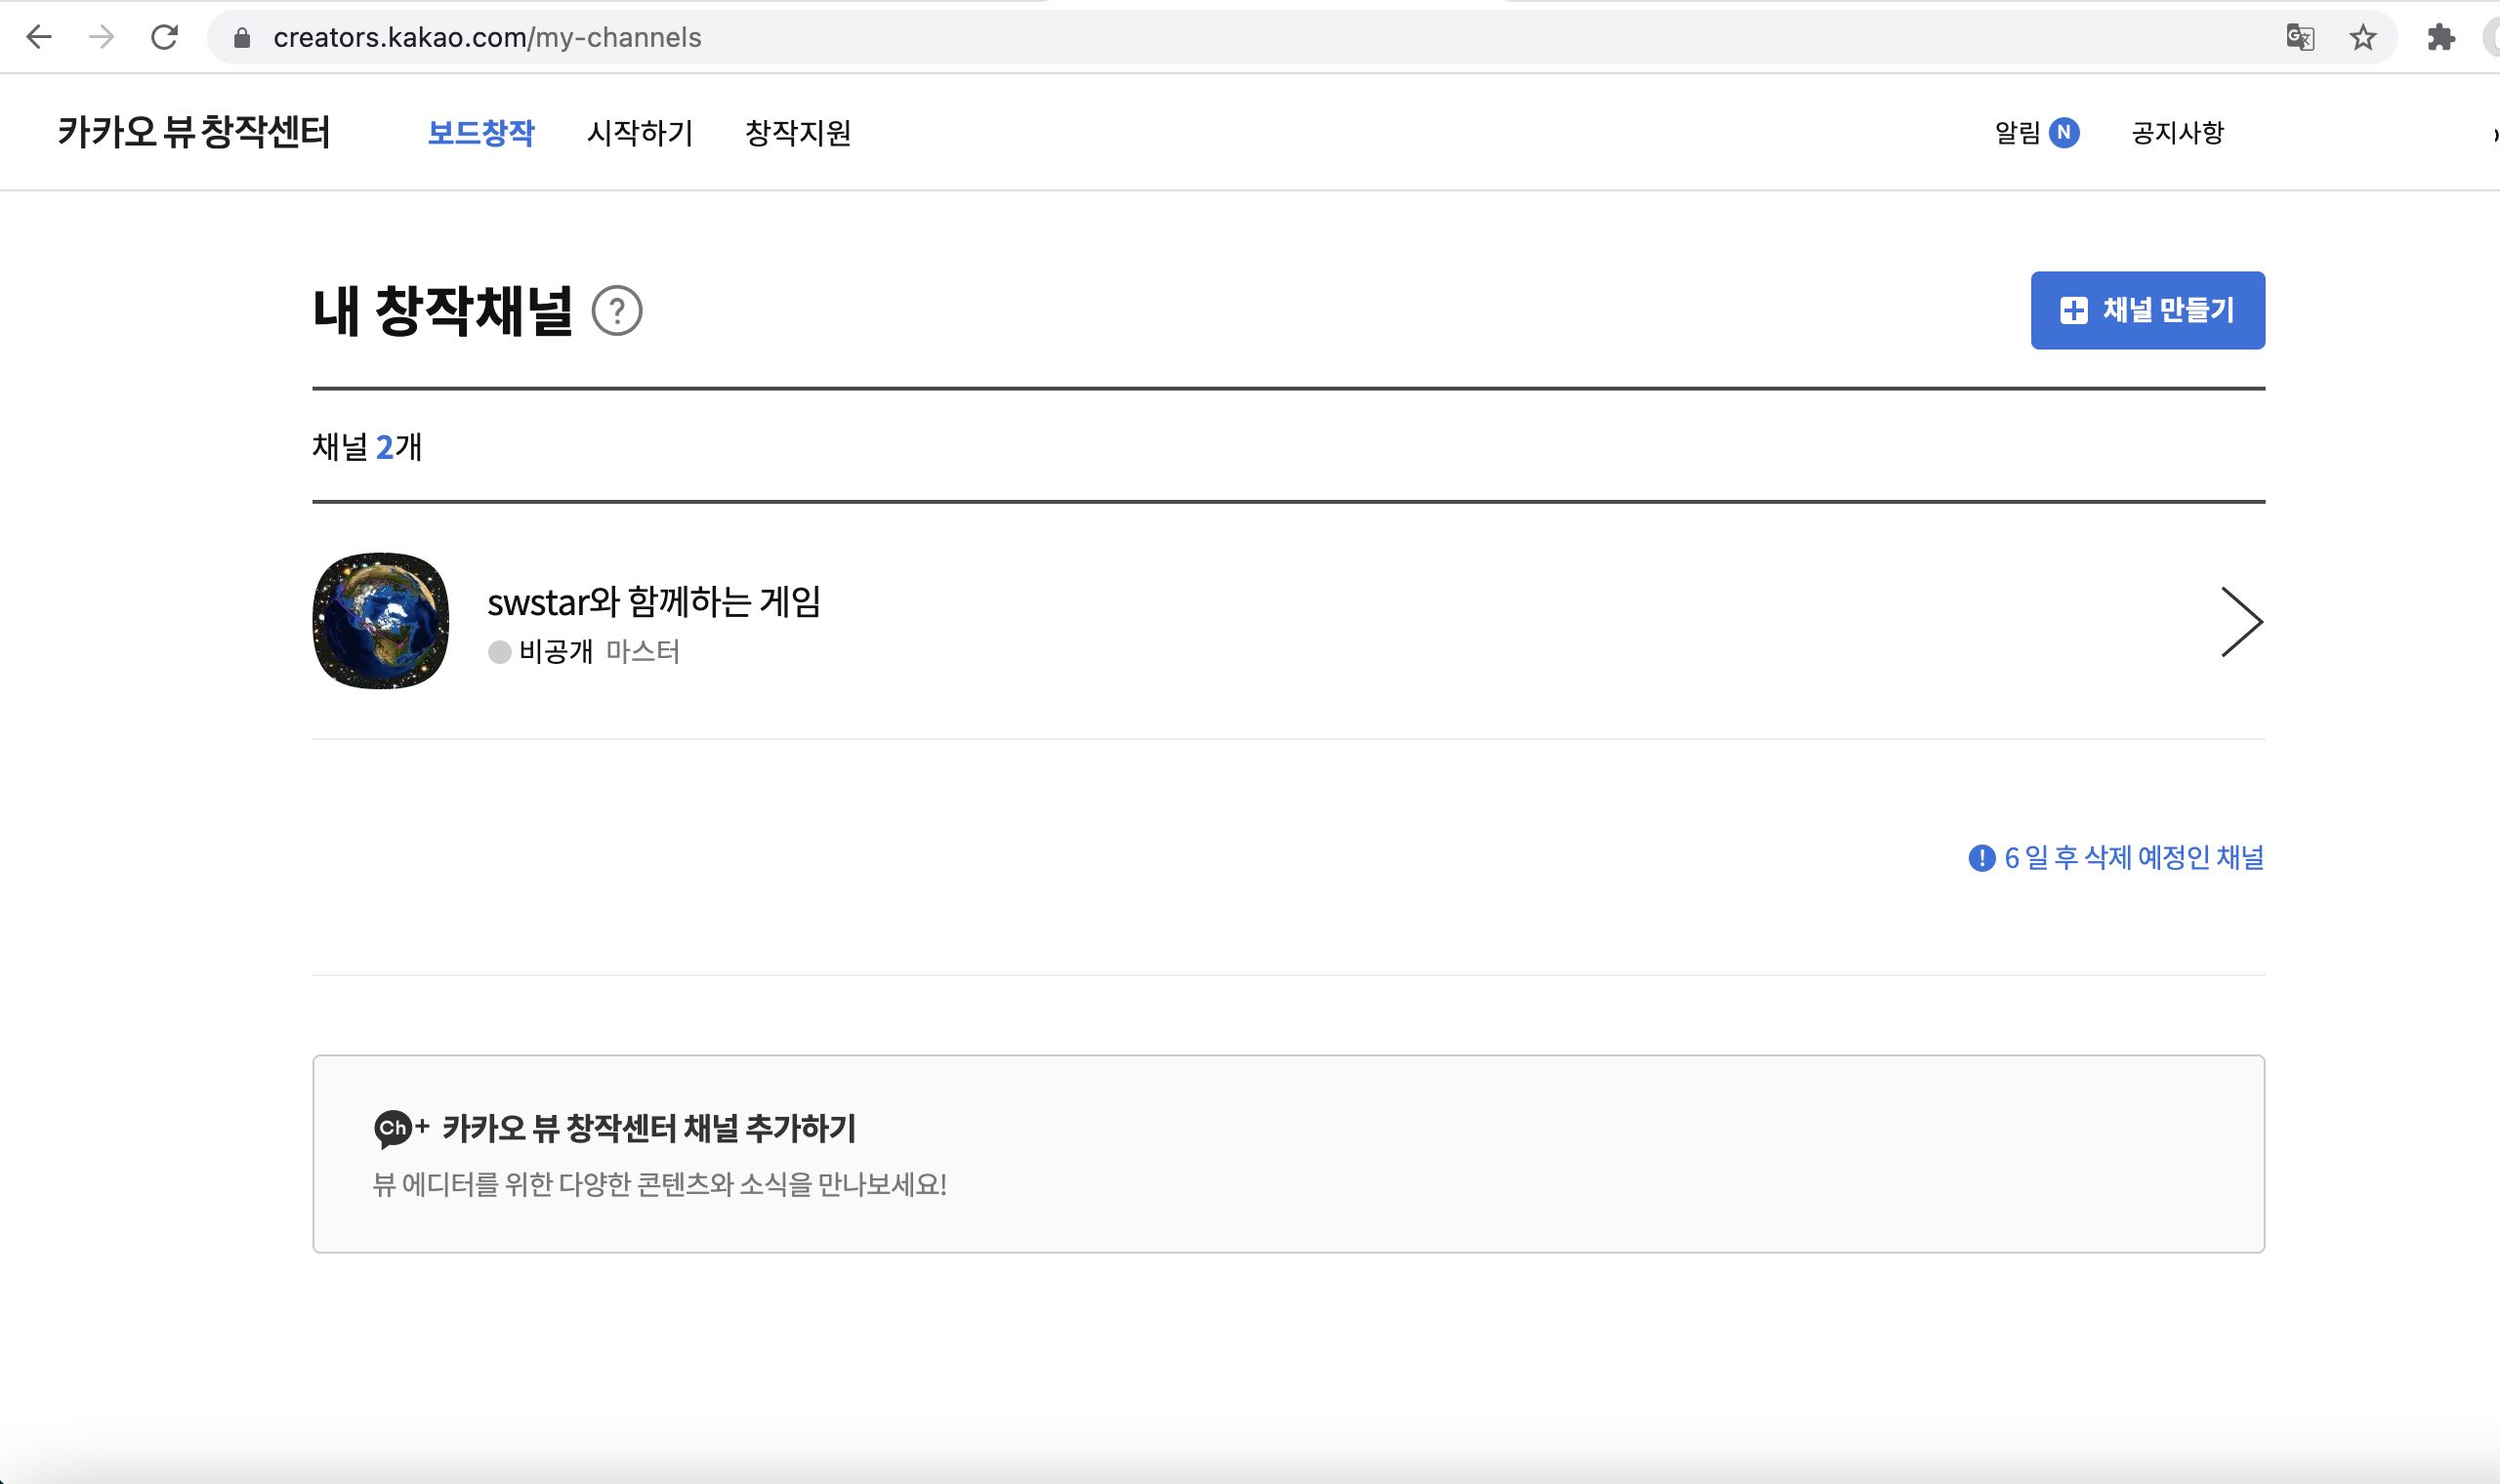 screenshot of Kakao View creation center, showing list of channels